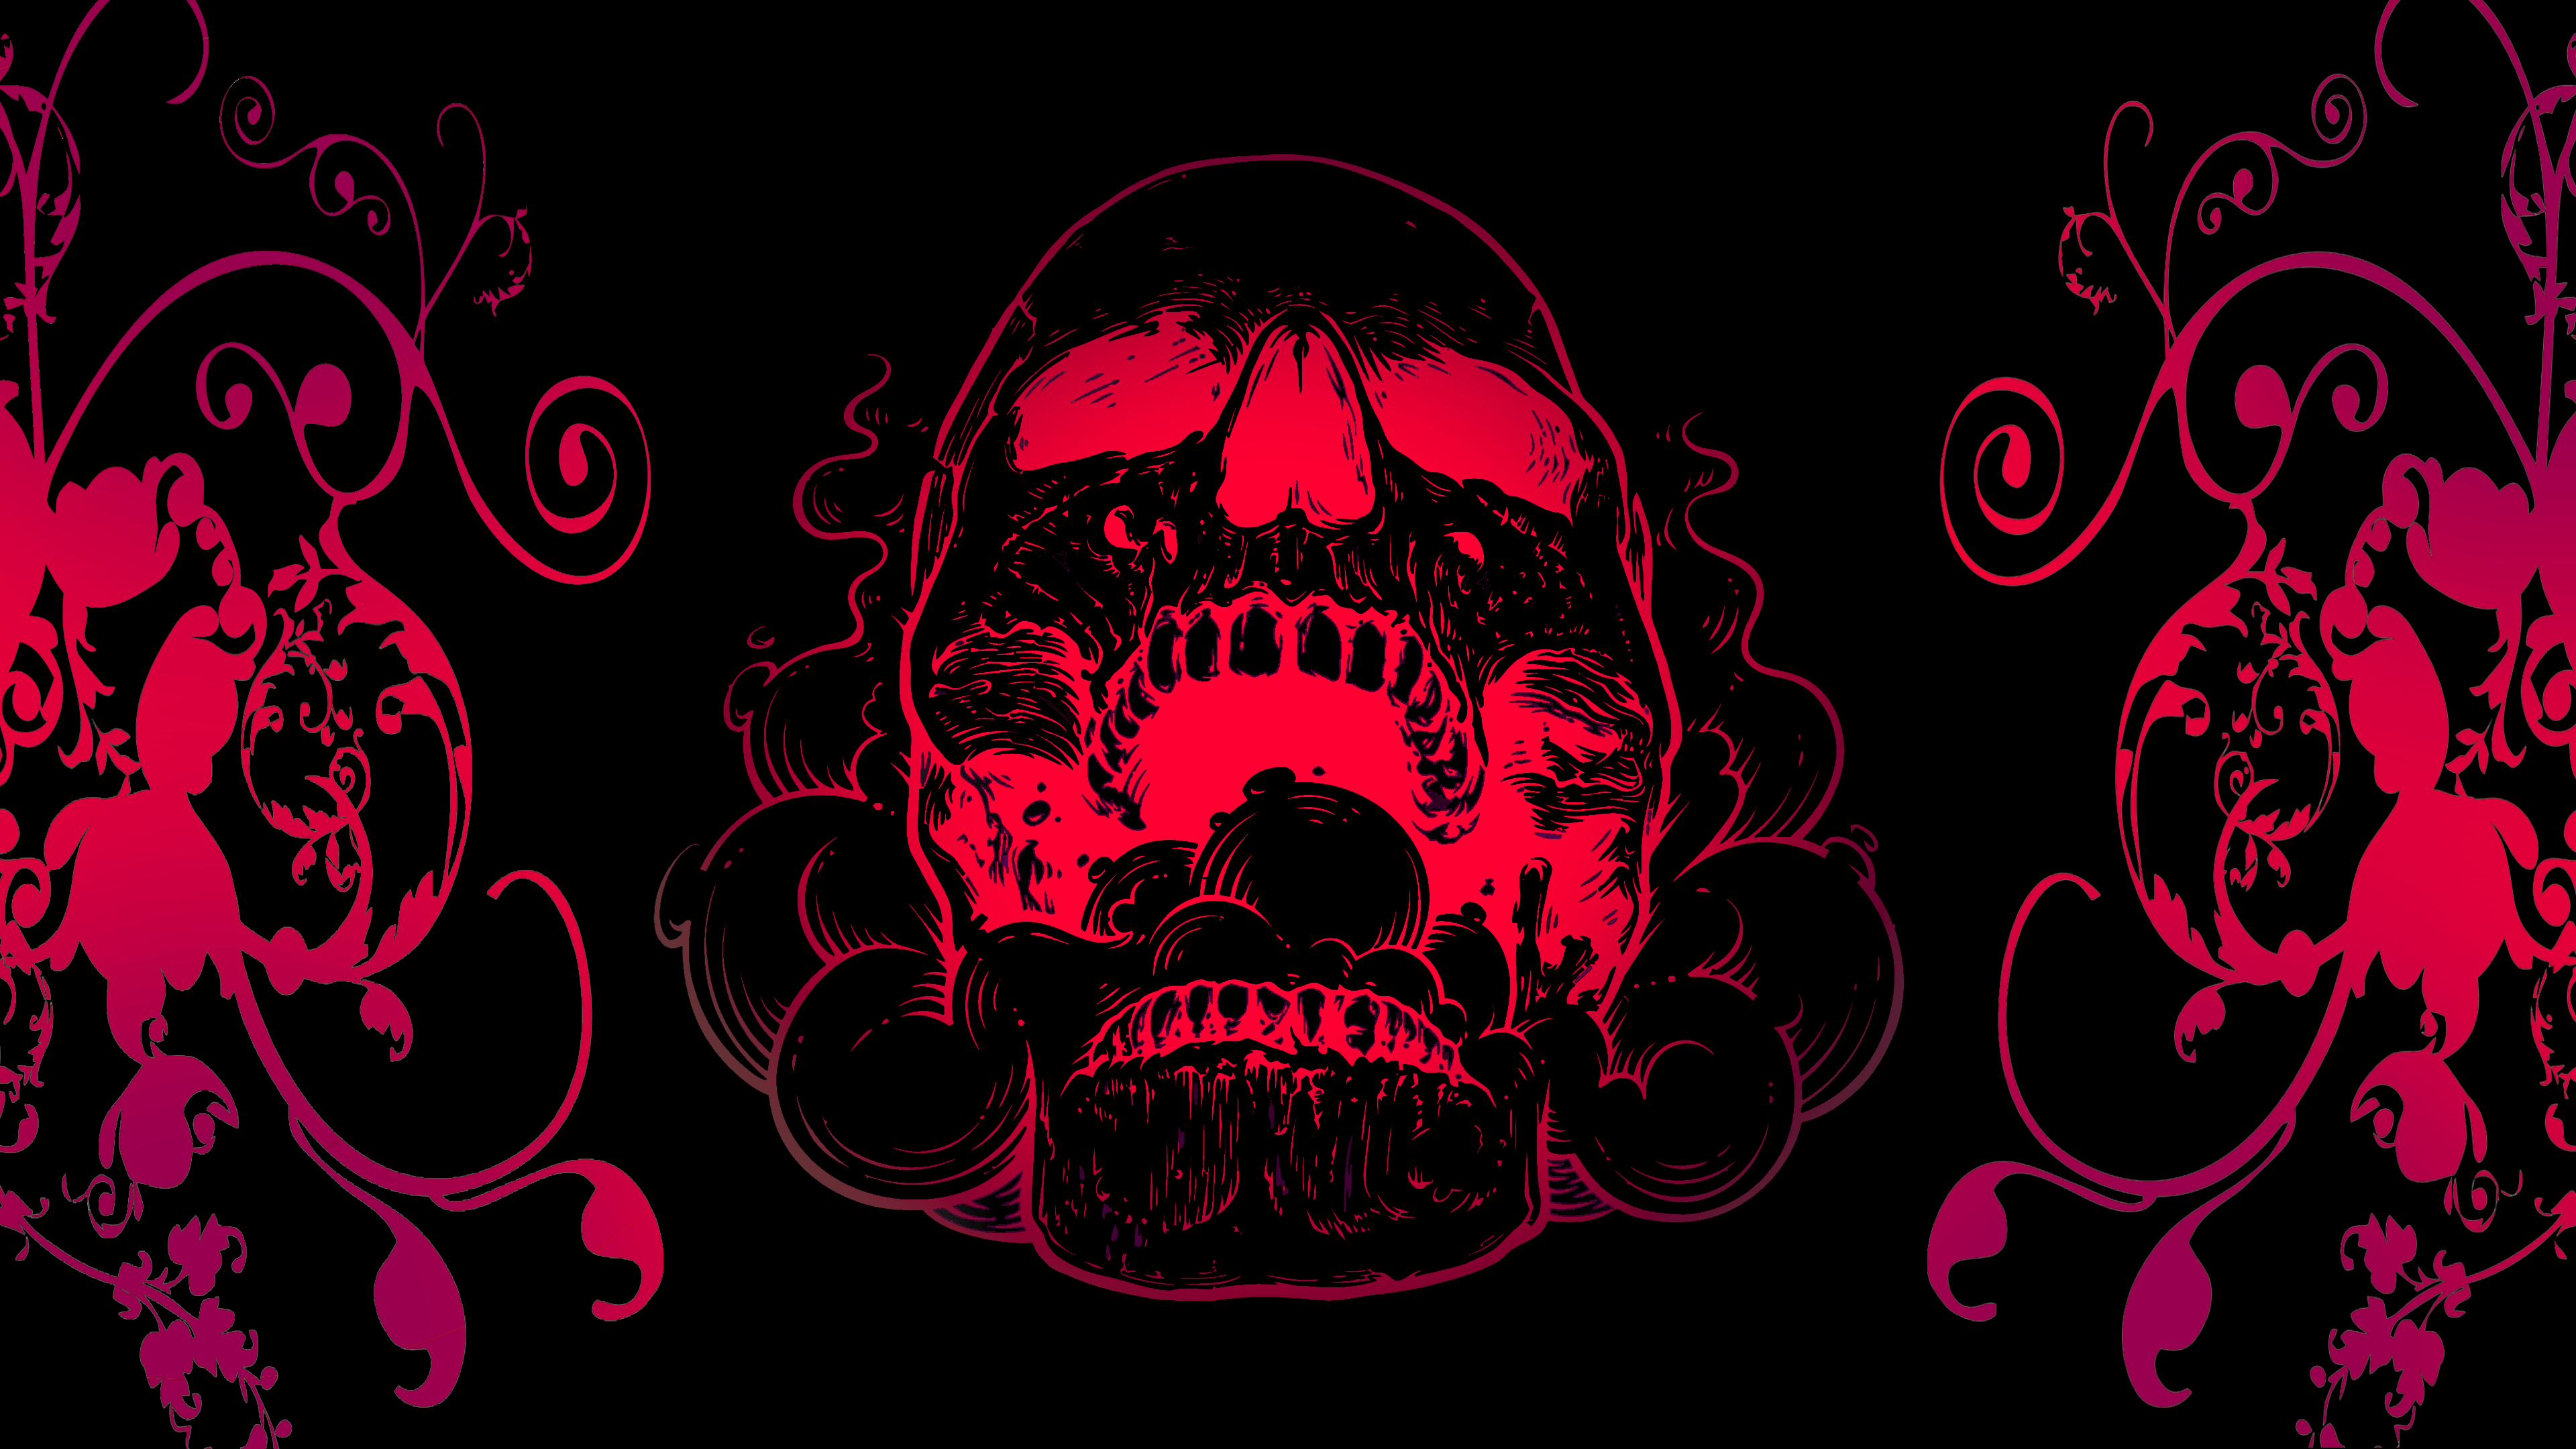 Black and Red Skull 4k Ultra HD Wallpaper. Background Image